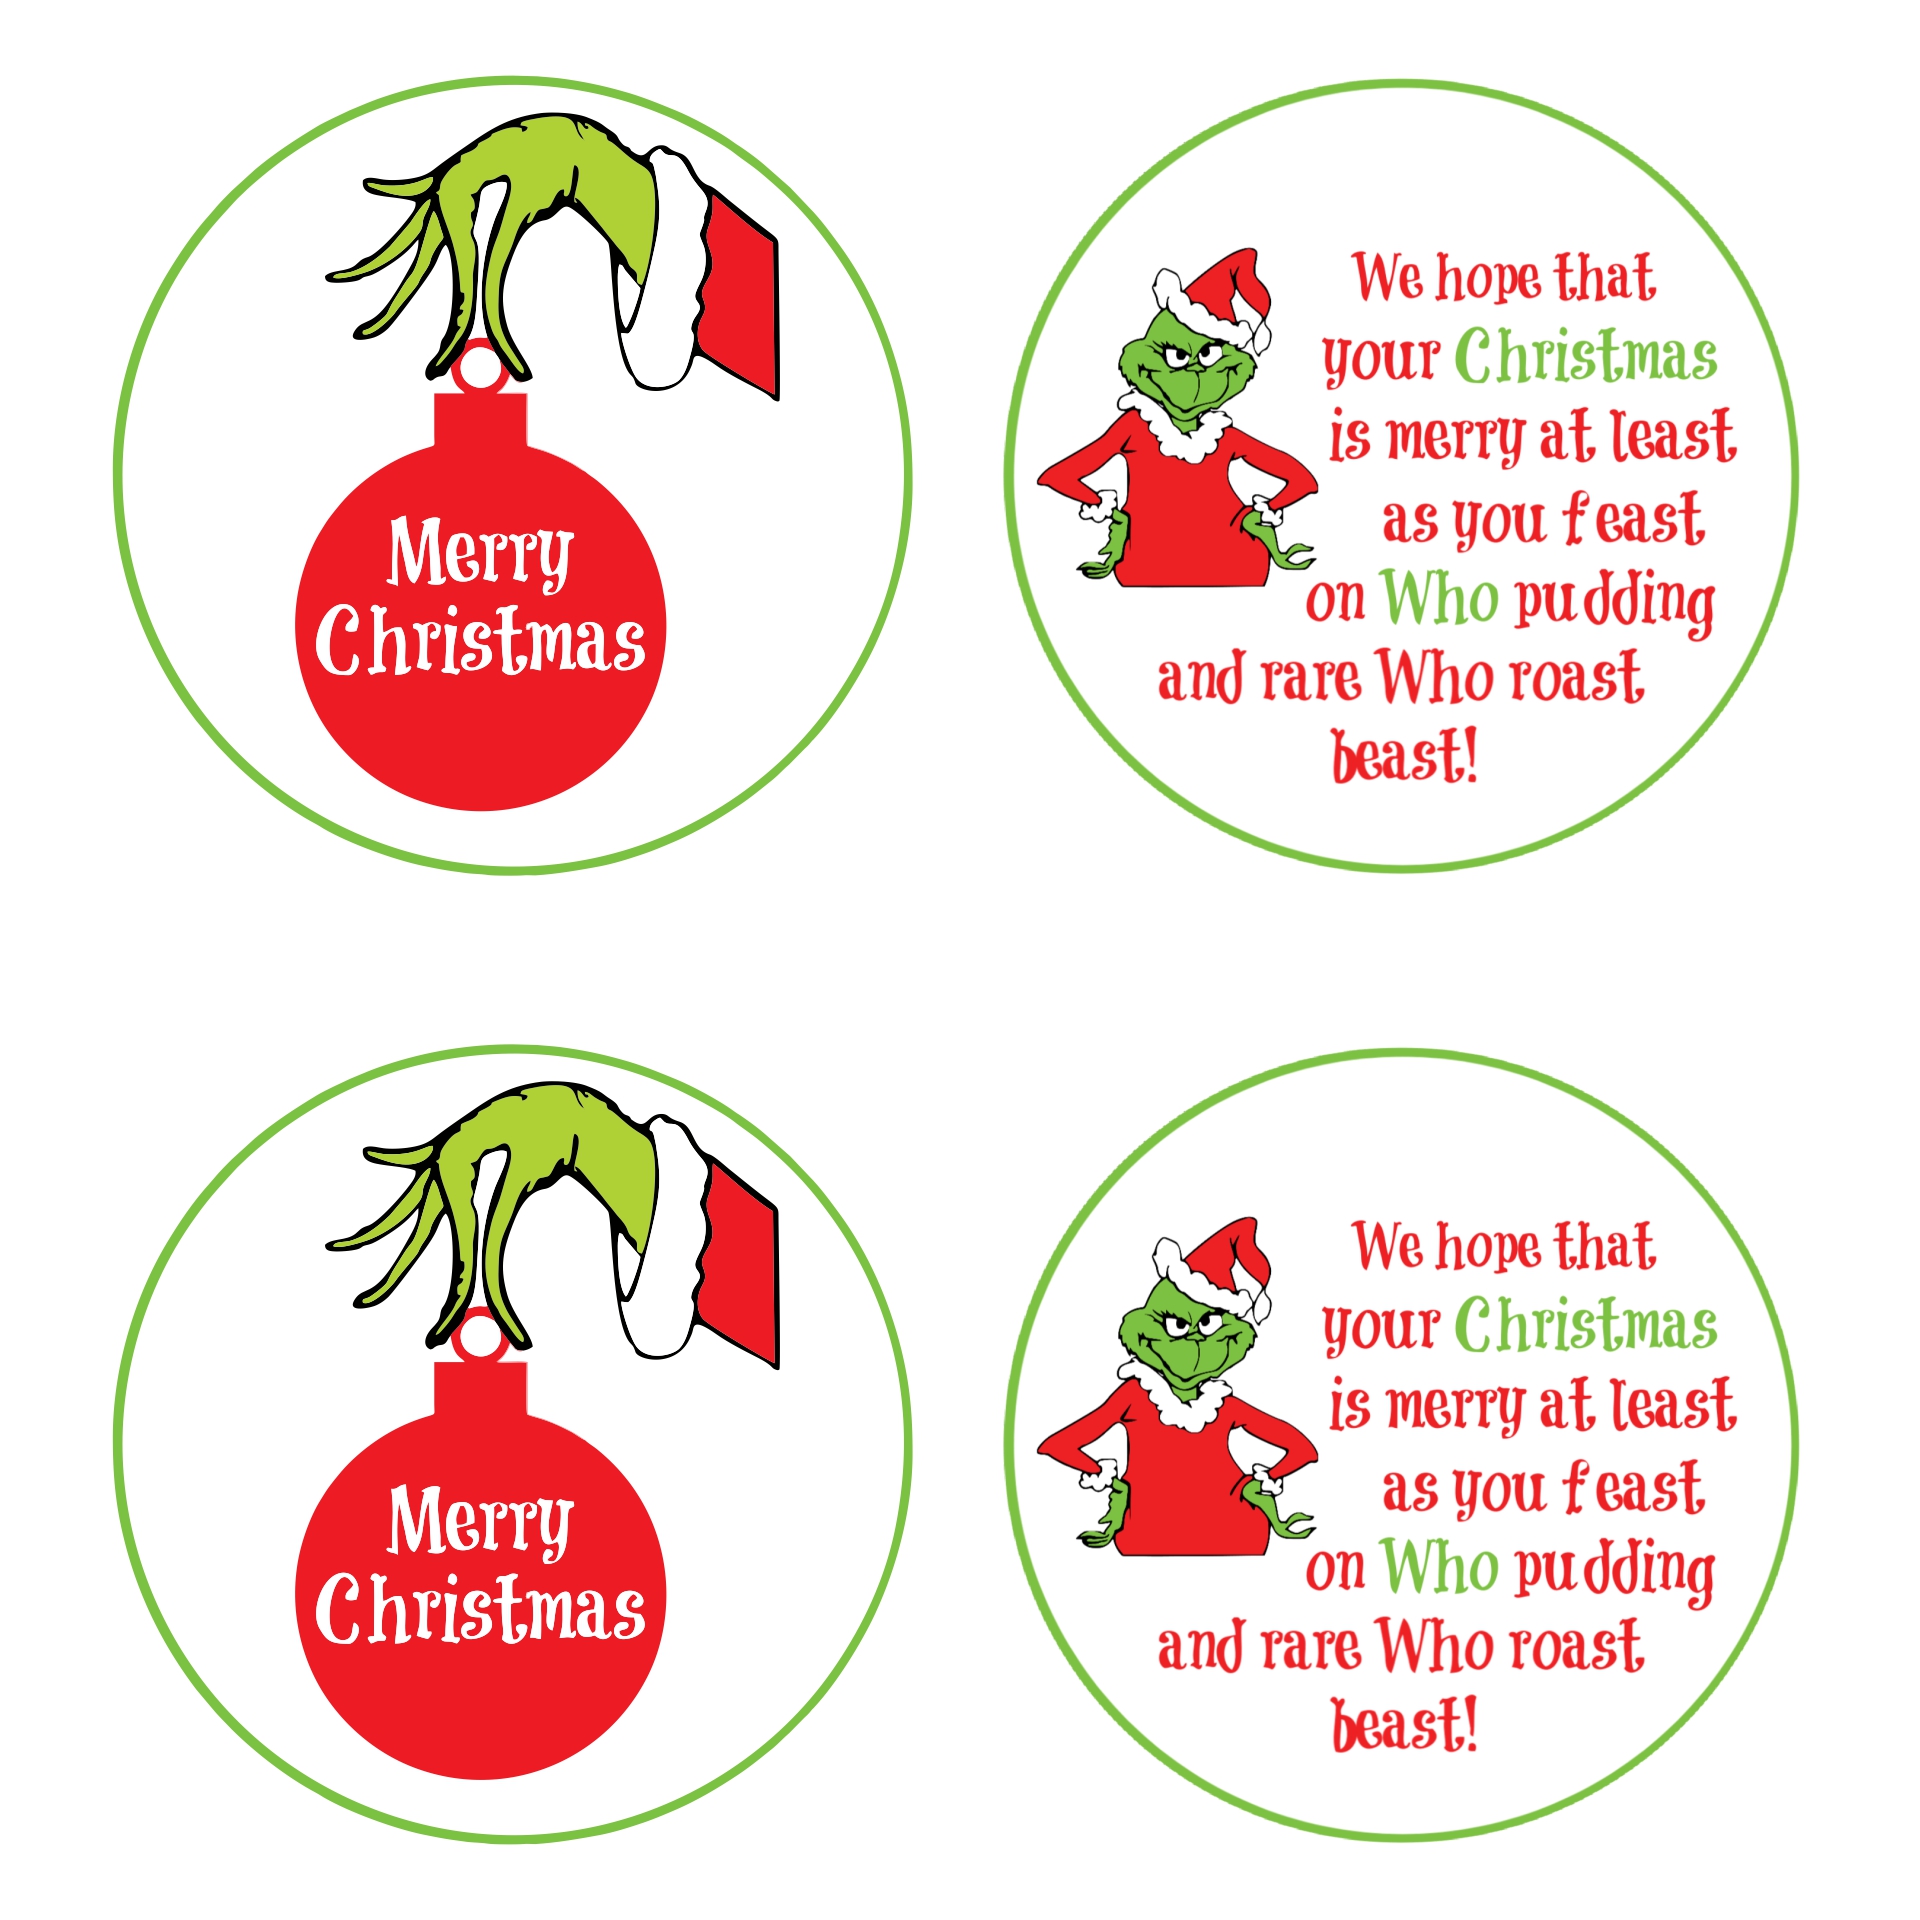 Free Printable Grinch Gift Tags - Printable Word Searches